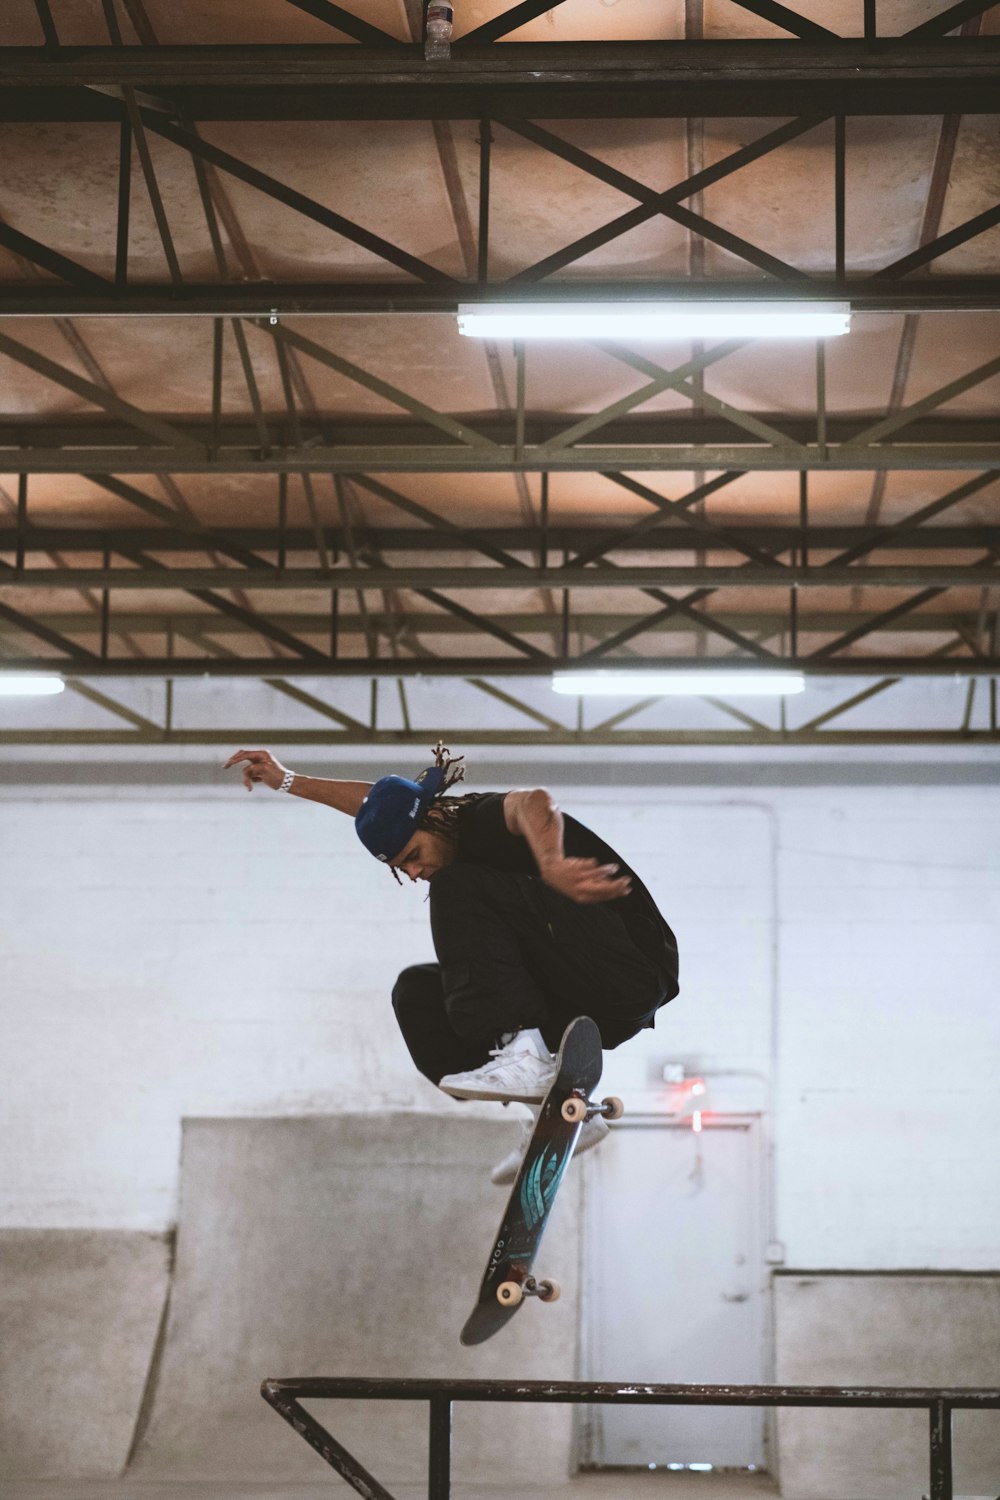 man riding skateboard in mid air indoors